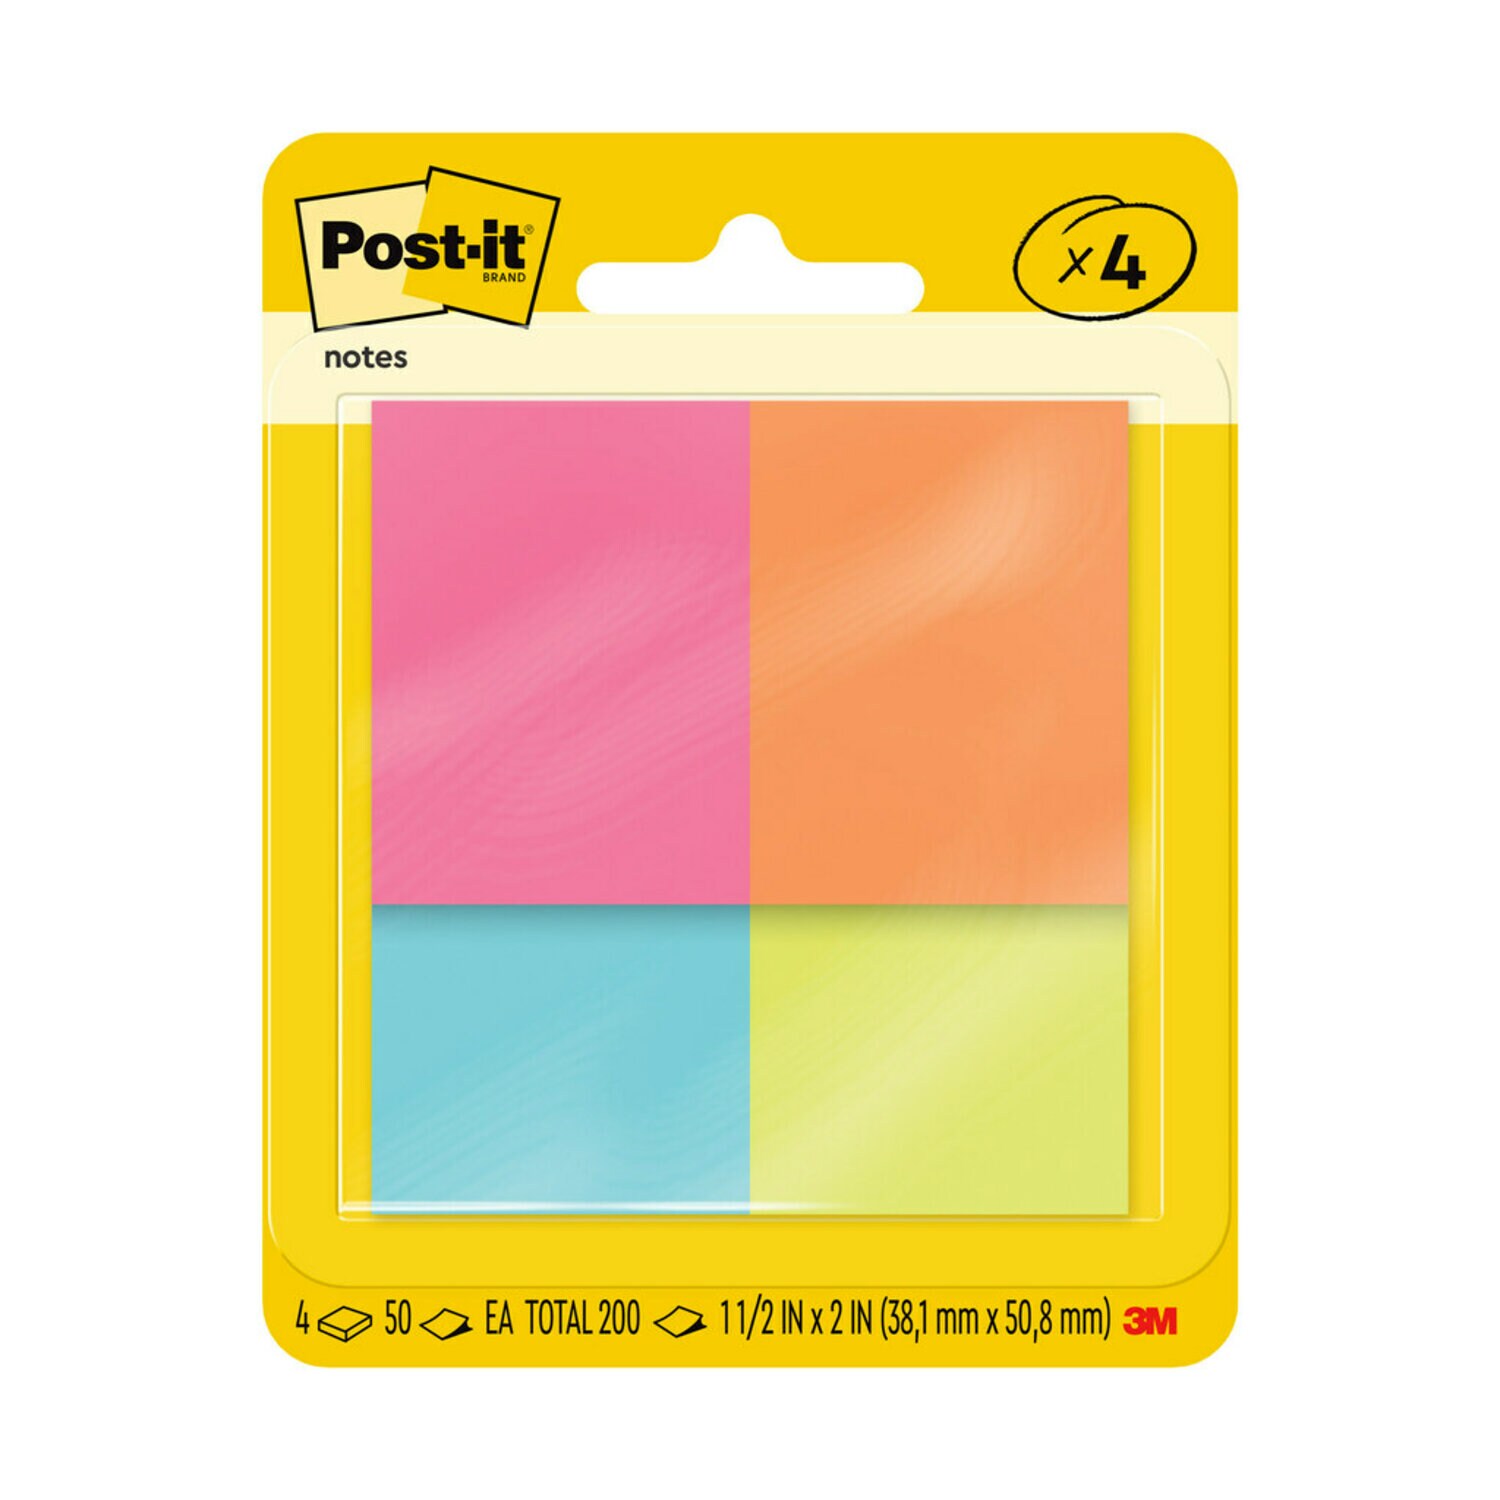 7100061168 - Post-it Notes 653-4AF, 1 3/8 in x 1 7/8 in (34.9 mm x 47.6 mm), Poptimistic Collection